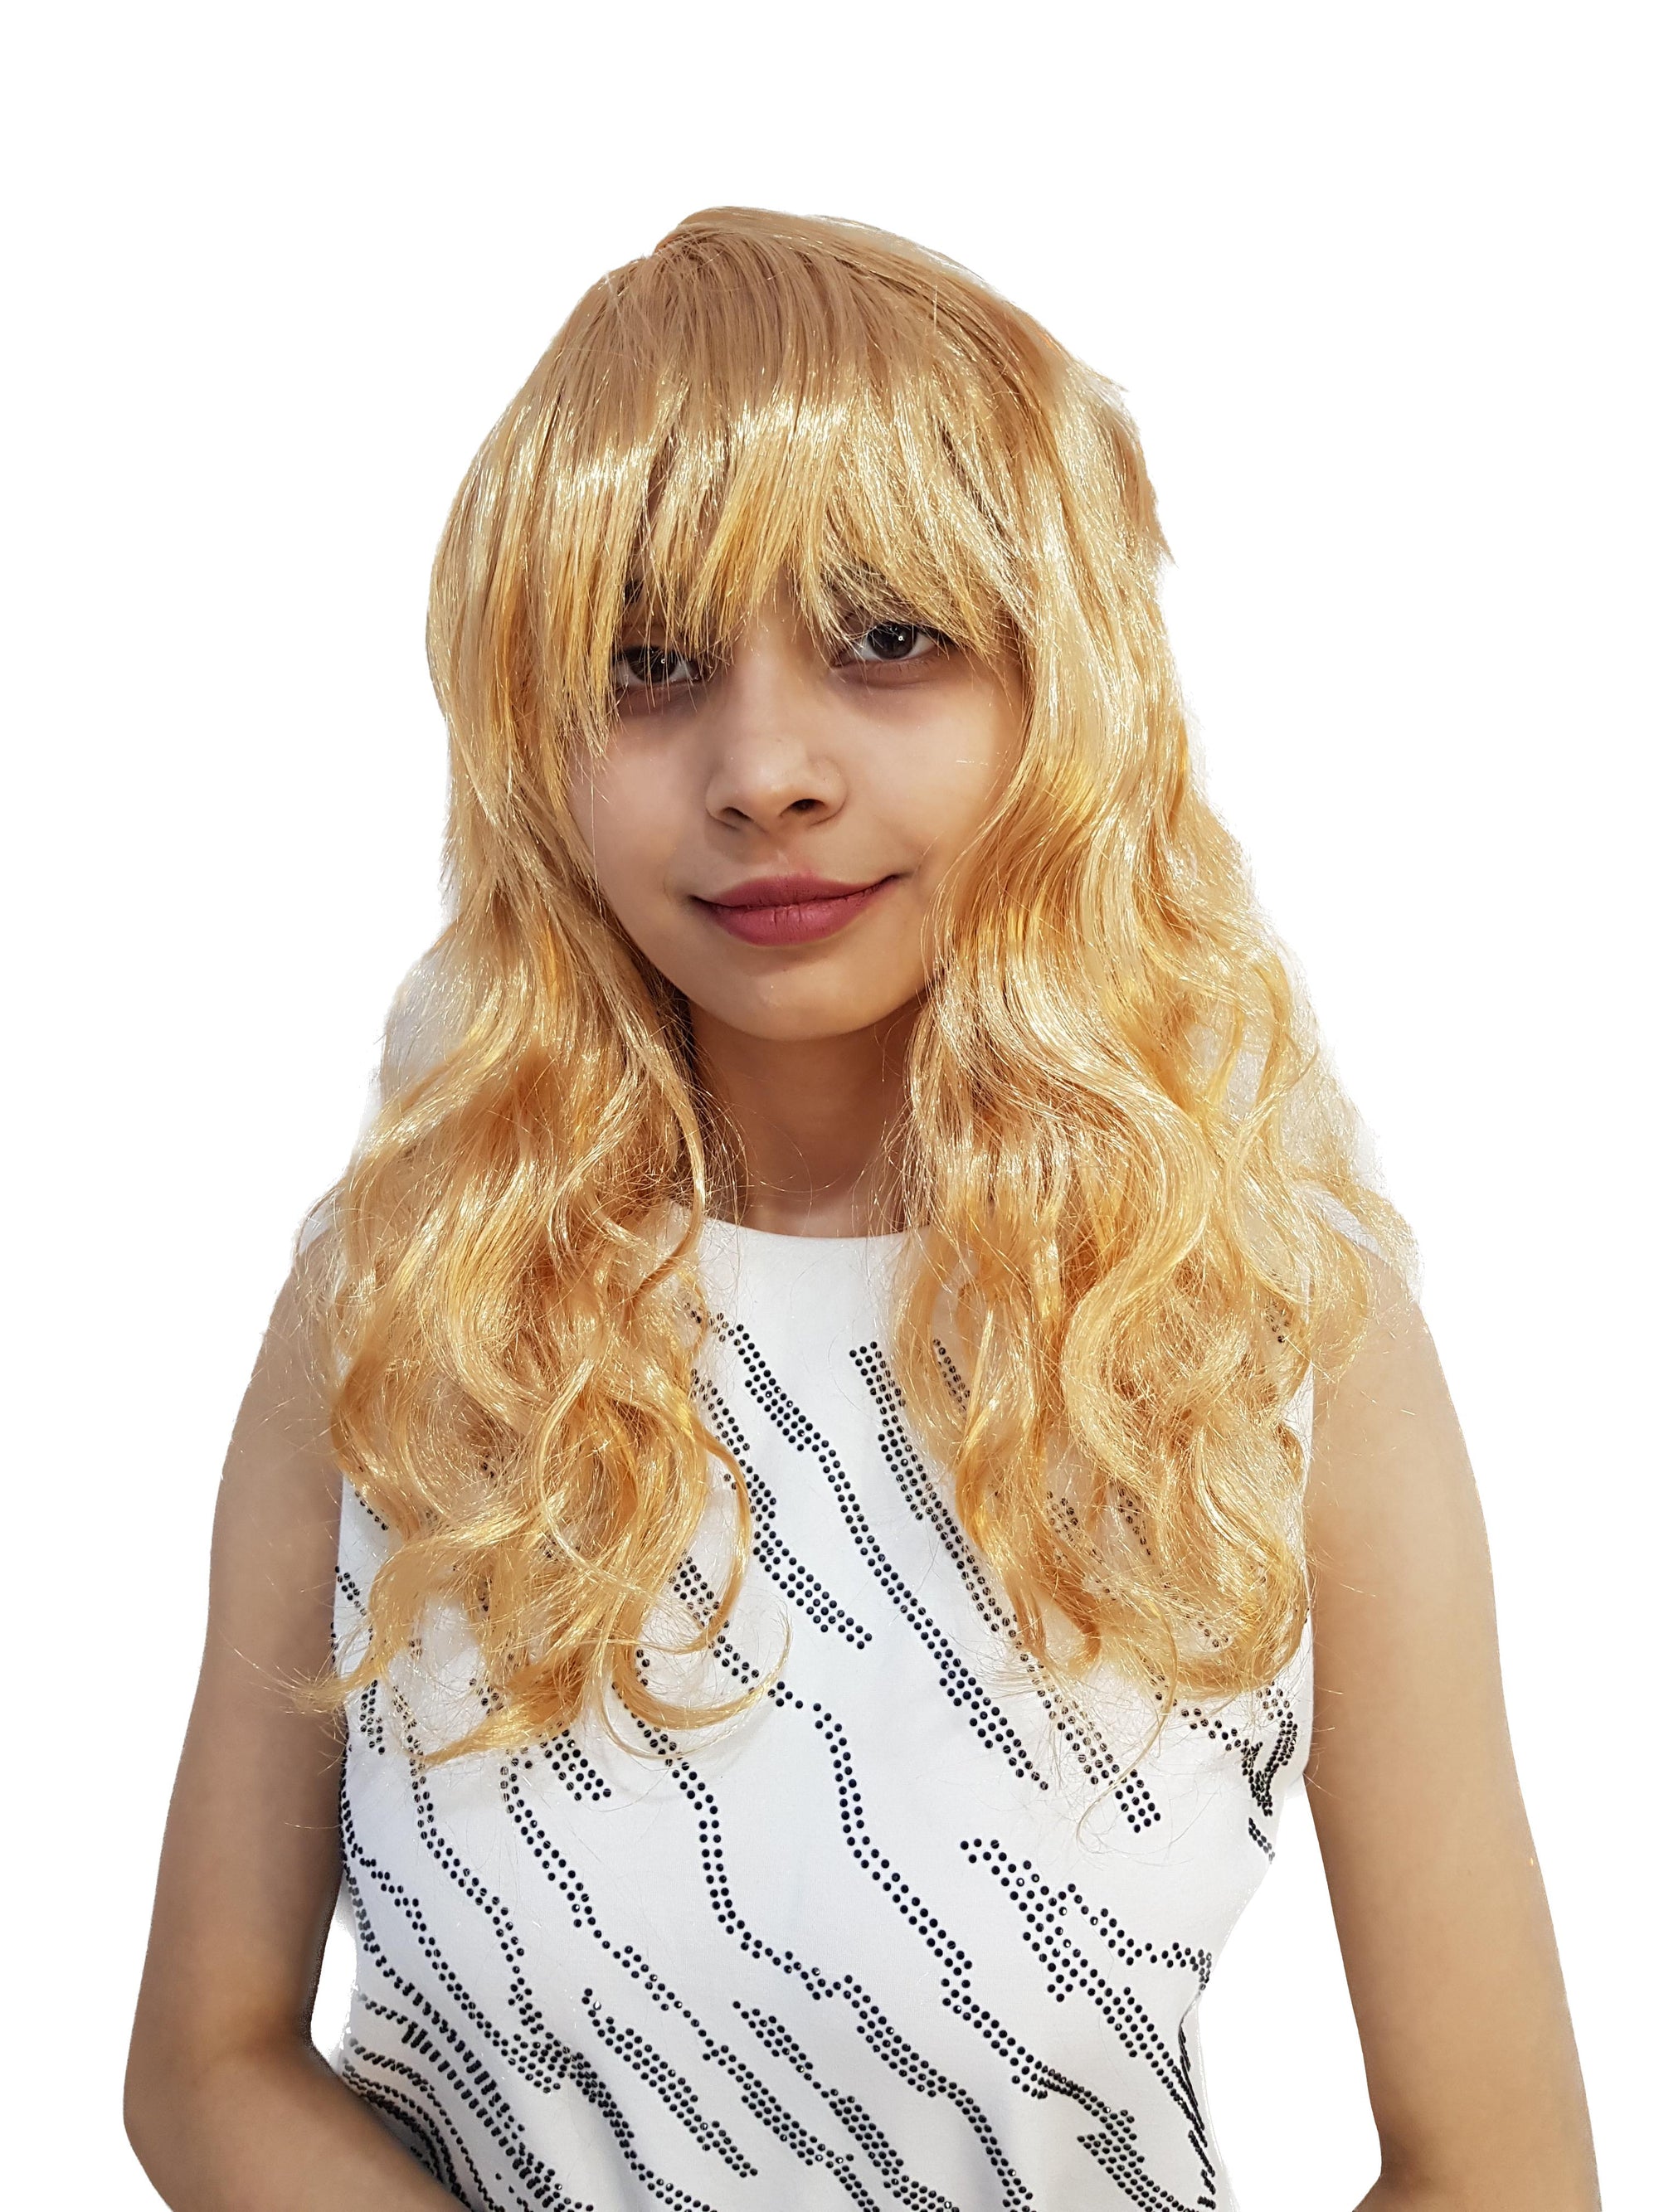 How To Color Your Human Hair Wigs Without Ruining Them